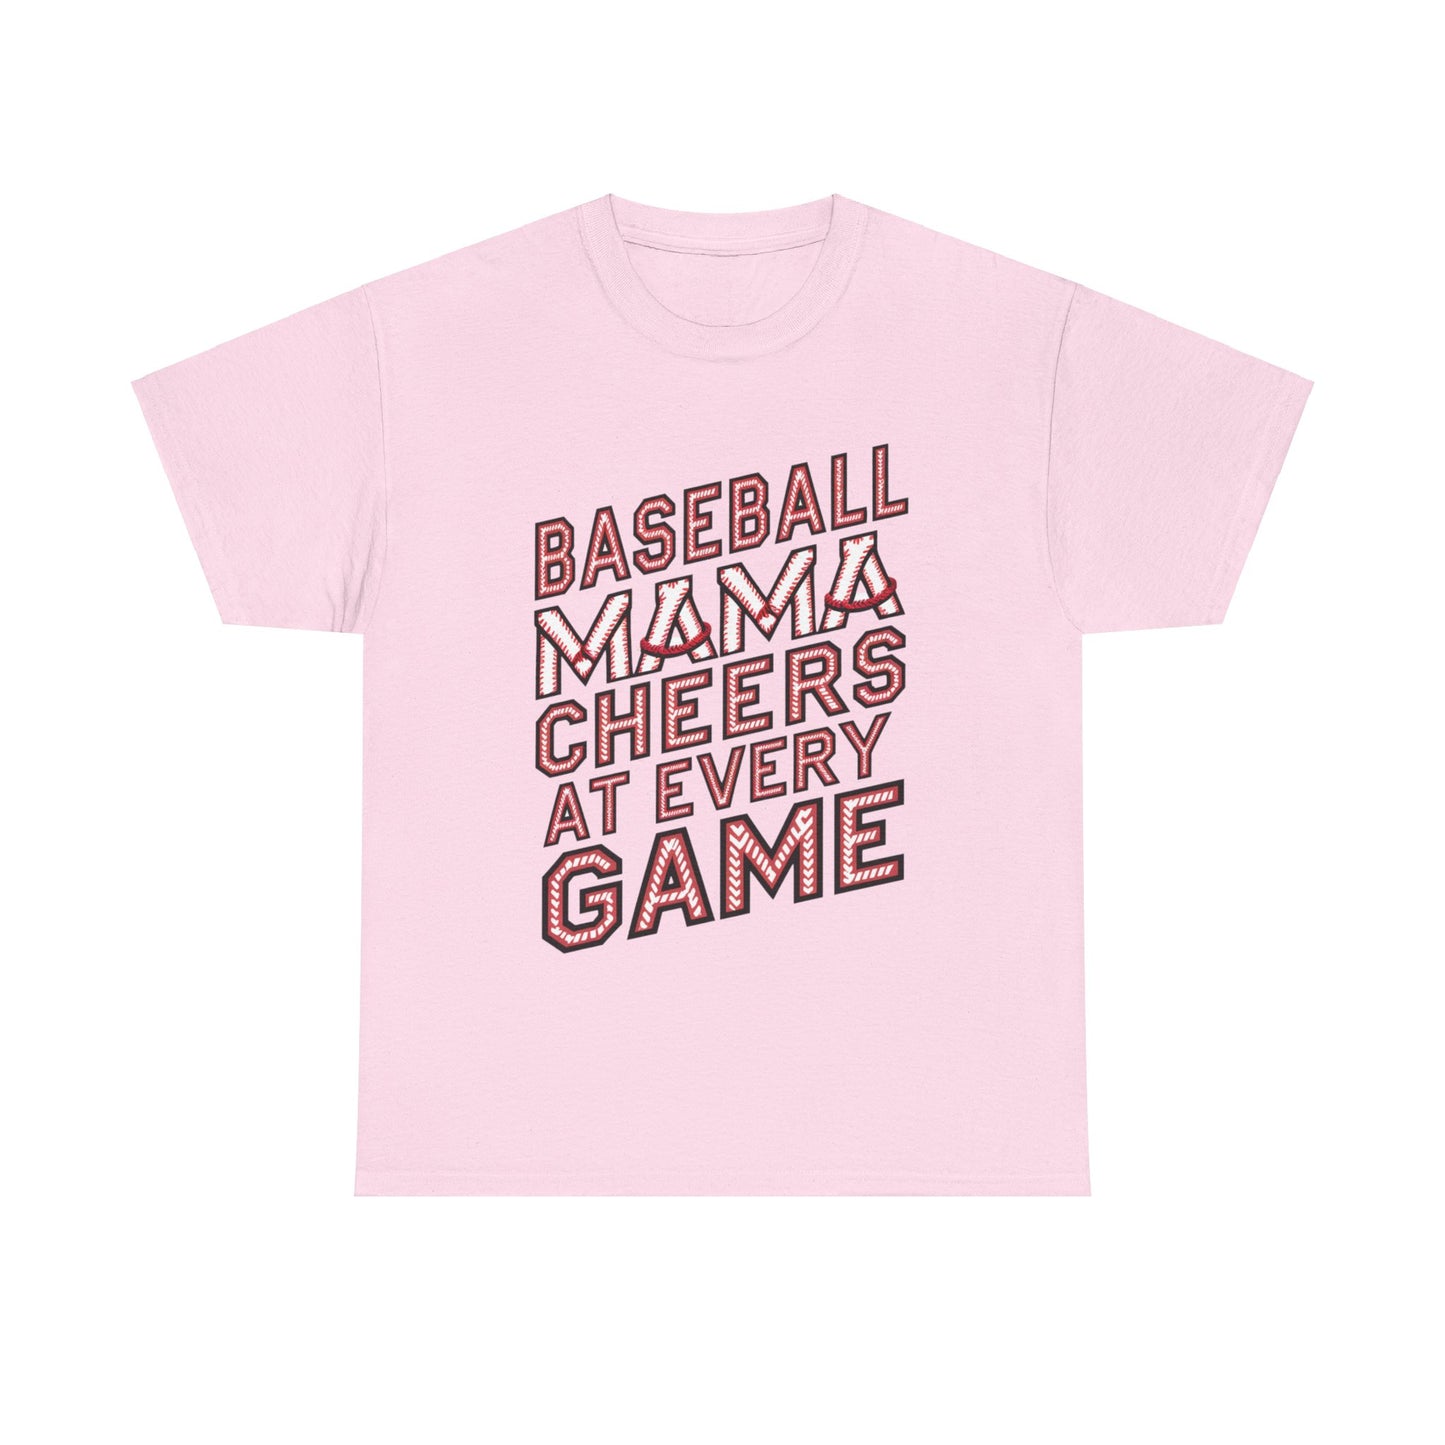 Baseball Mom Shirt | Mother Cheers At Every Game